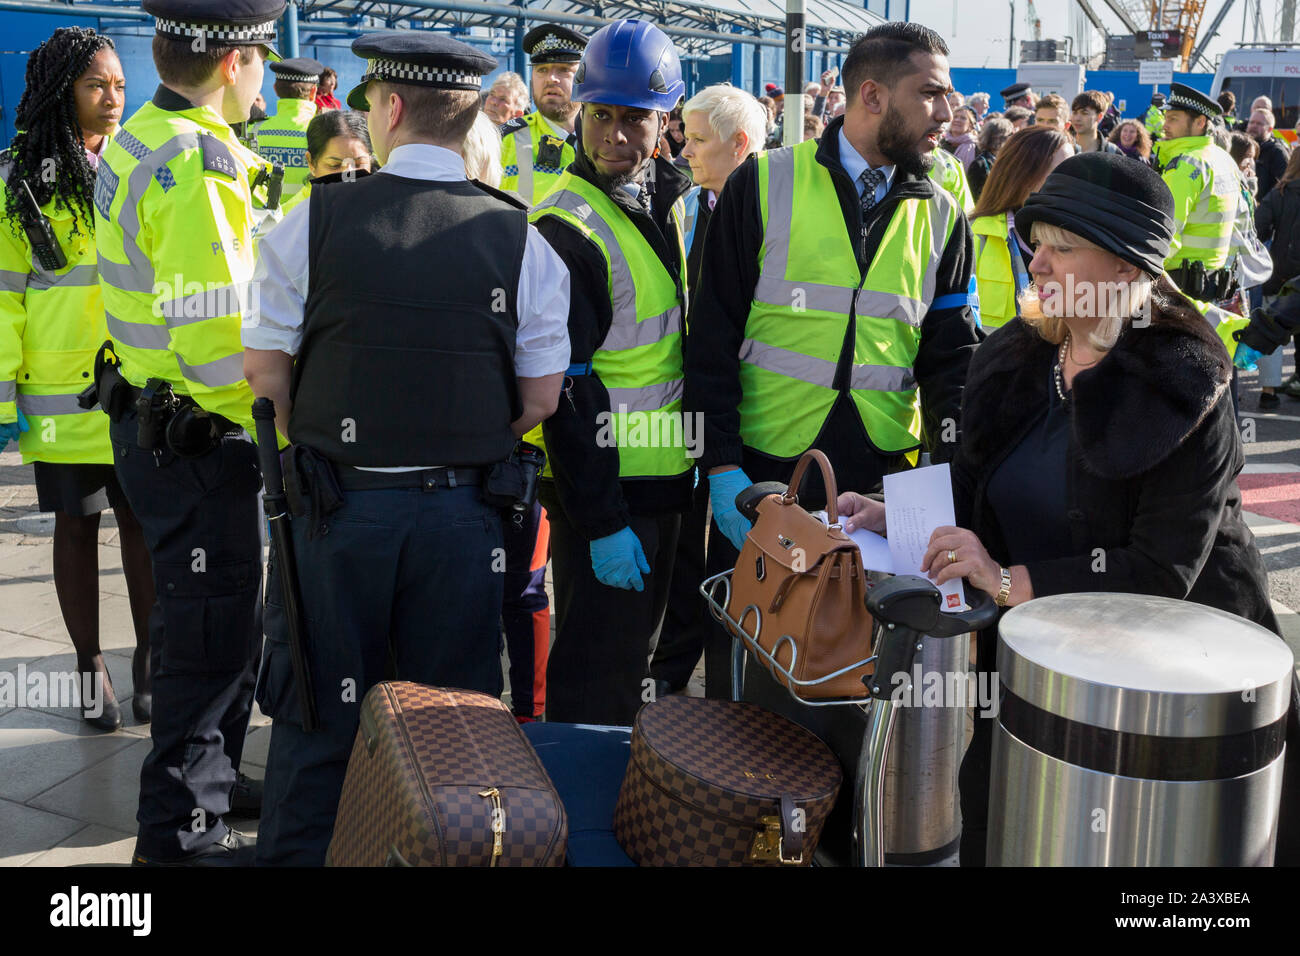 Air passengers find their way through environmental activists protesting about Climate Change during the occupation of City Airport (London's Business Travel hub) in east London, the fourth day of a two-week prolonged worldwide protest by members of Extinction Rebellion, on 10th October 2019, in London, England. Stock Photo